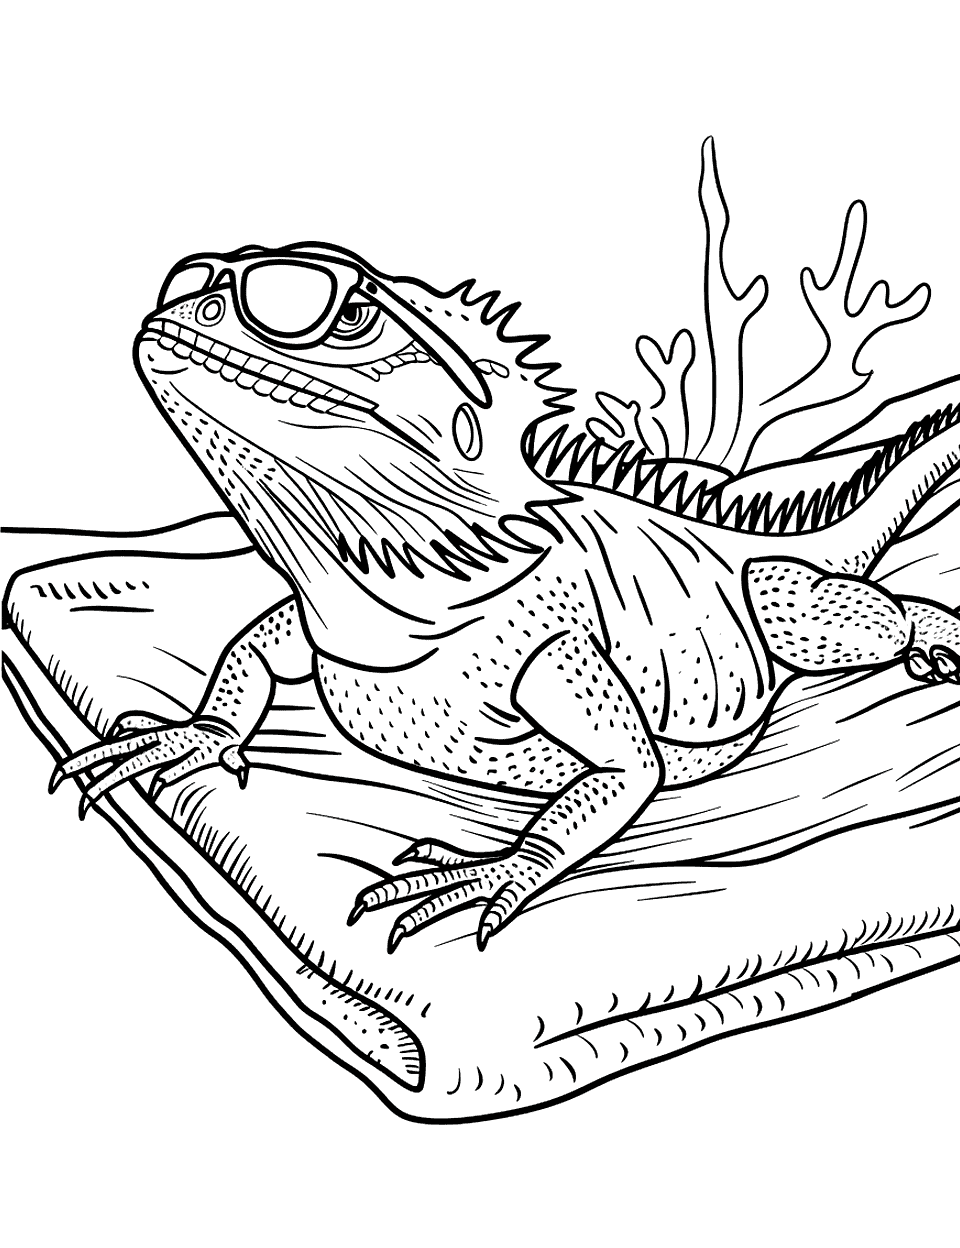 Bearded Dragon with Sunglasses Lizard Coloring Page - A bearded dragon wearing oversized sunglasses, lounging on a towel.